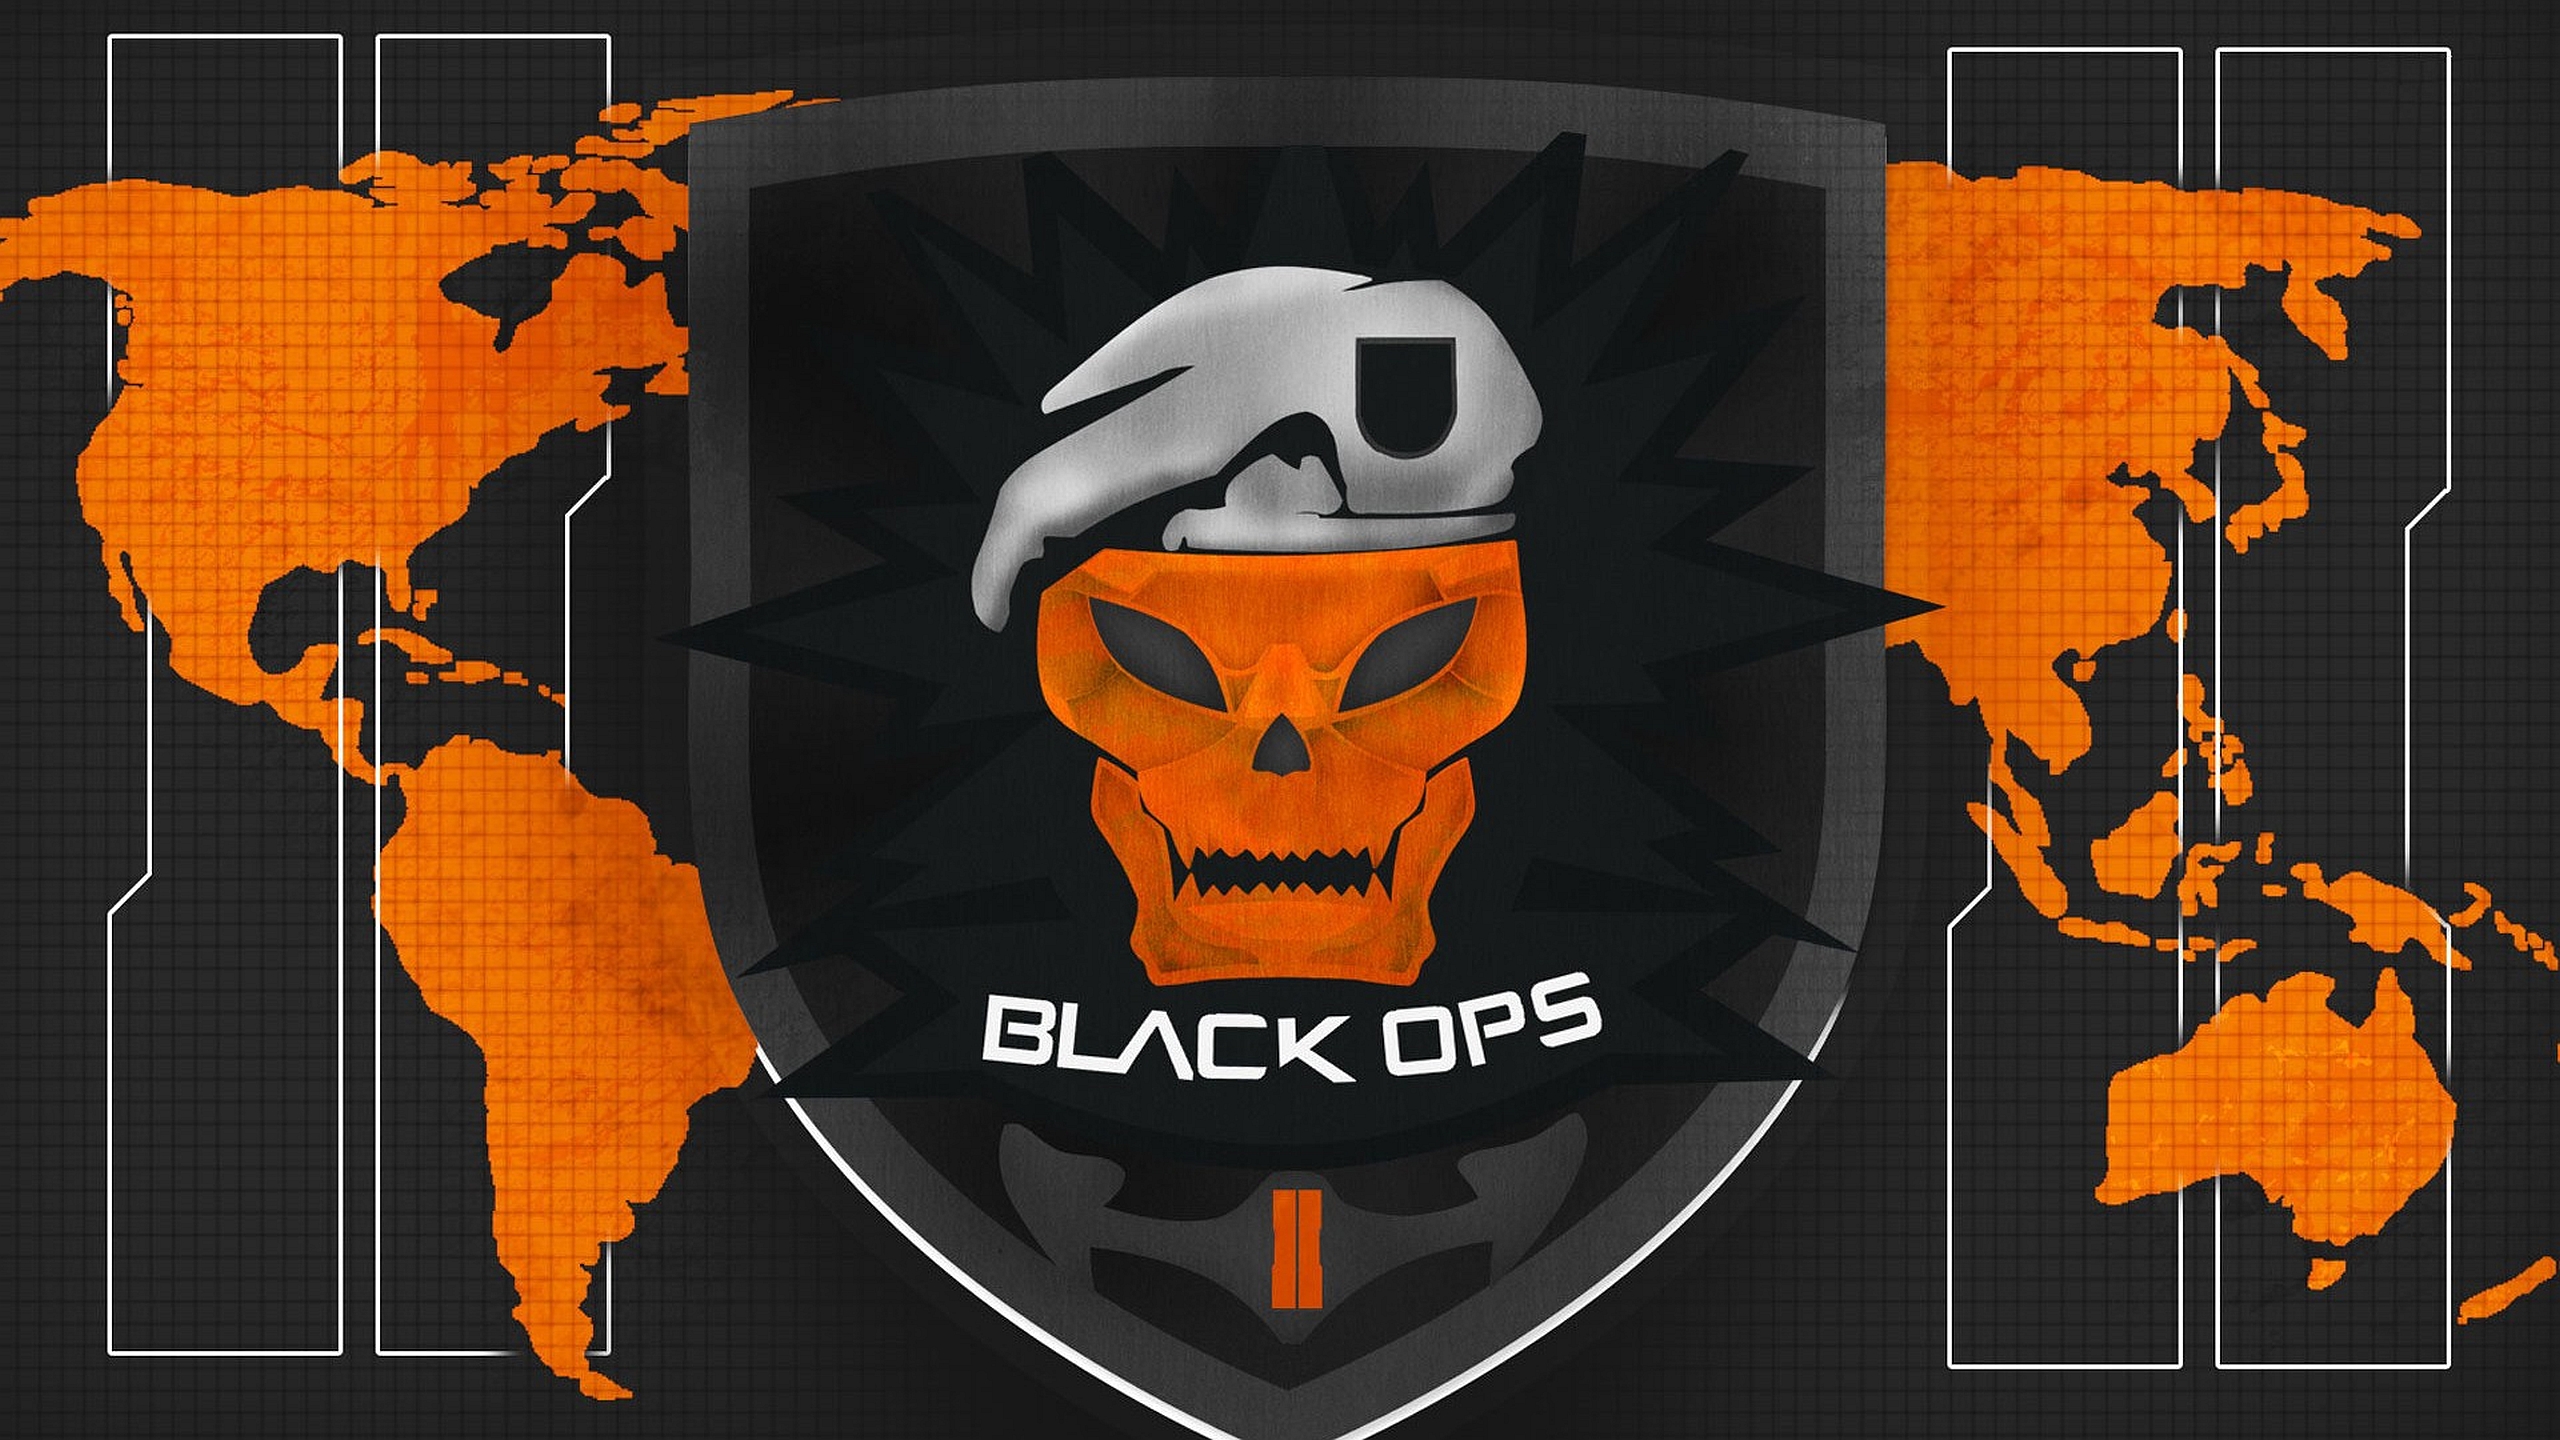 Call Of Duty: Black Ops wallpapers for desktop, download free Call Of Duty: Black  Ops pictures and backgrounds for PC 